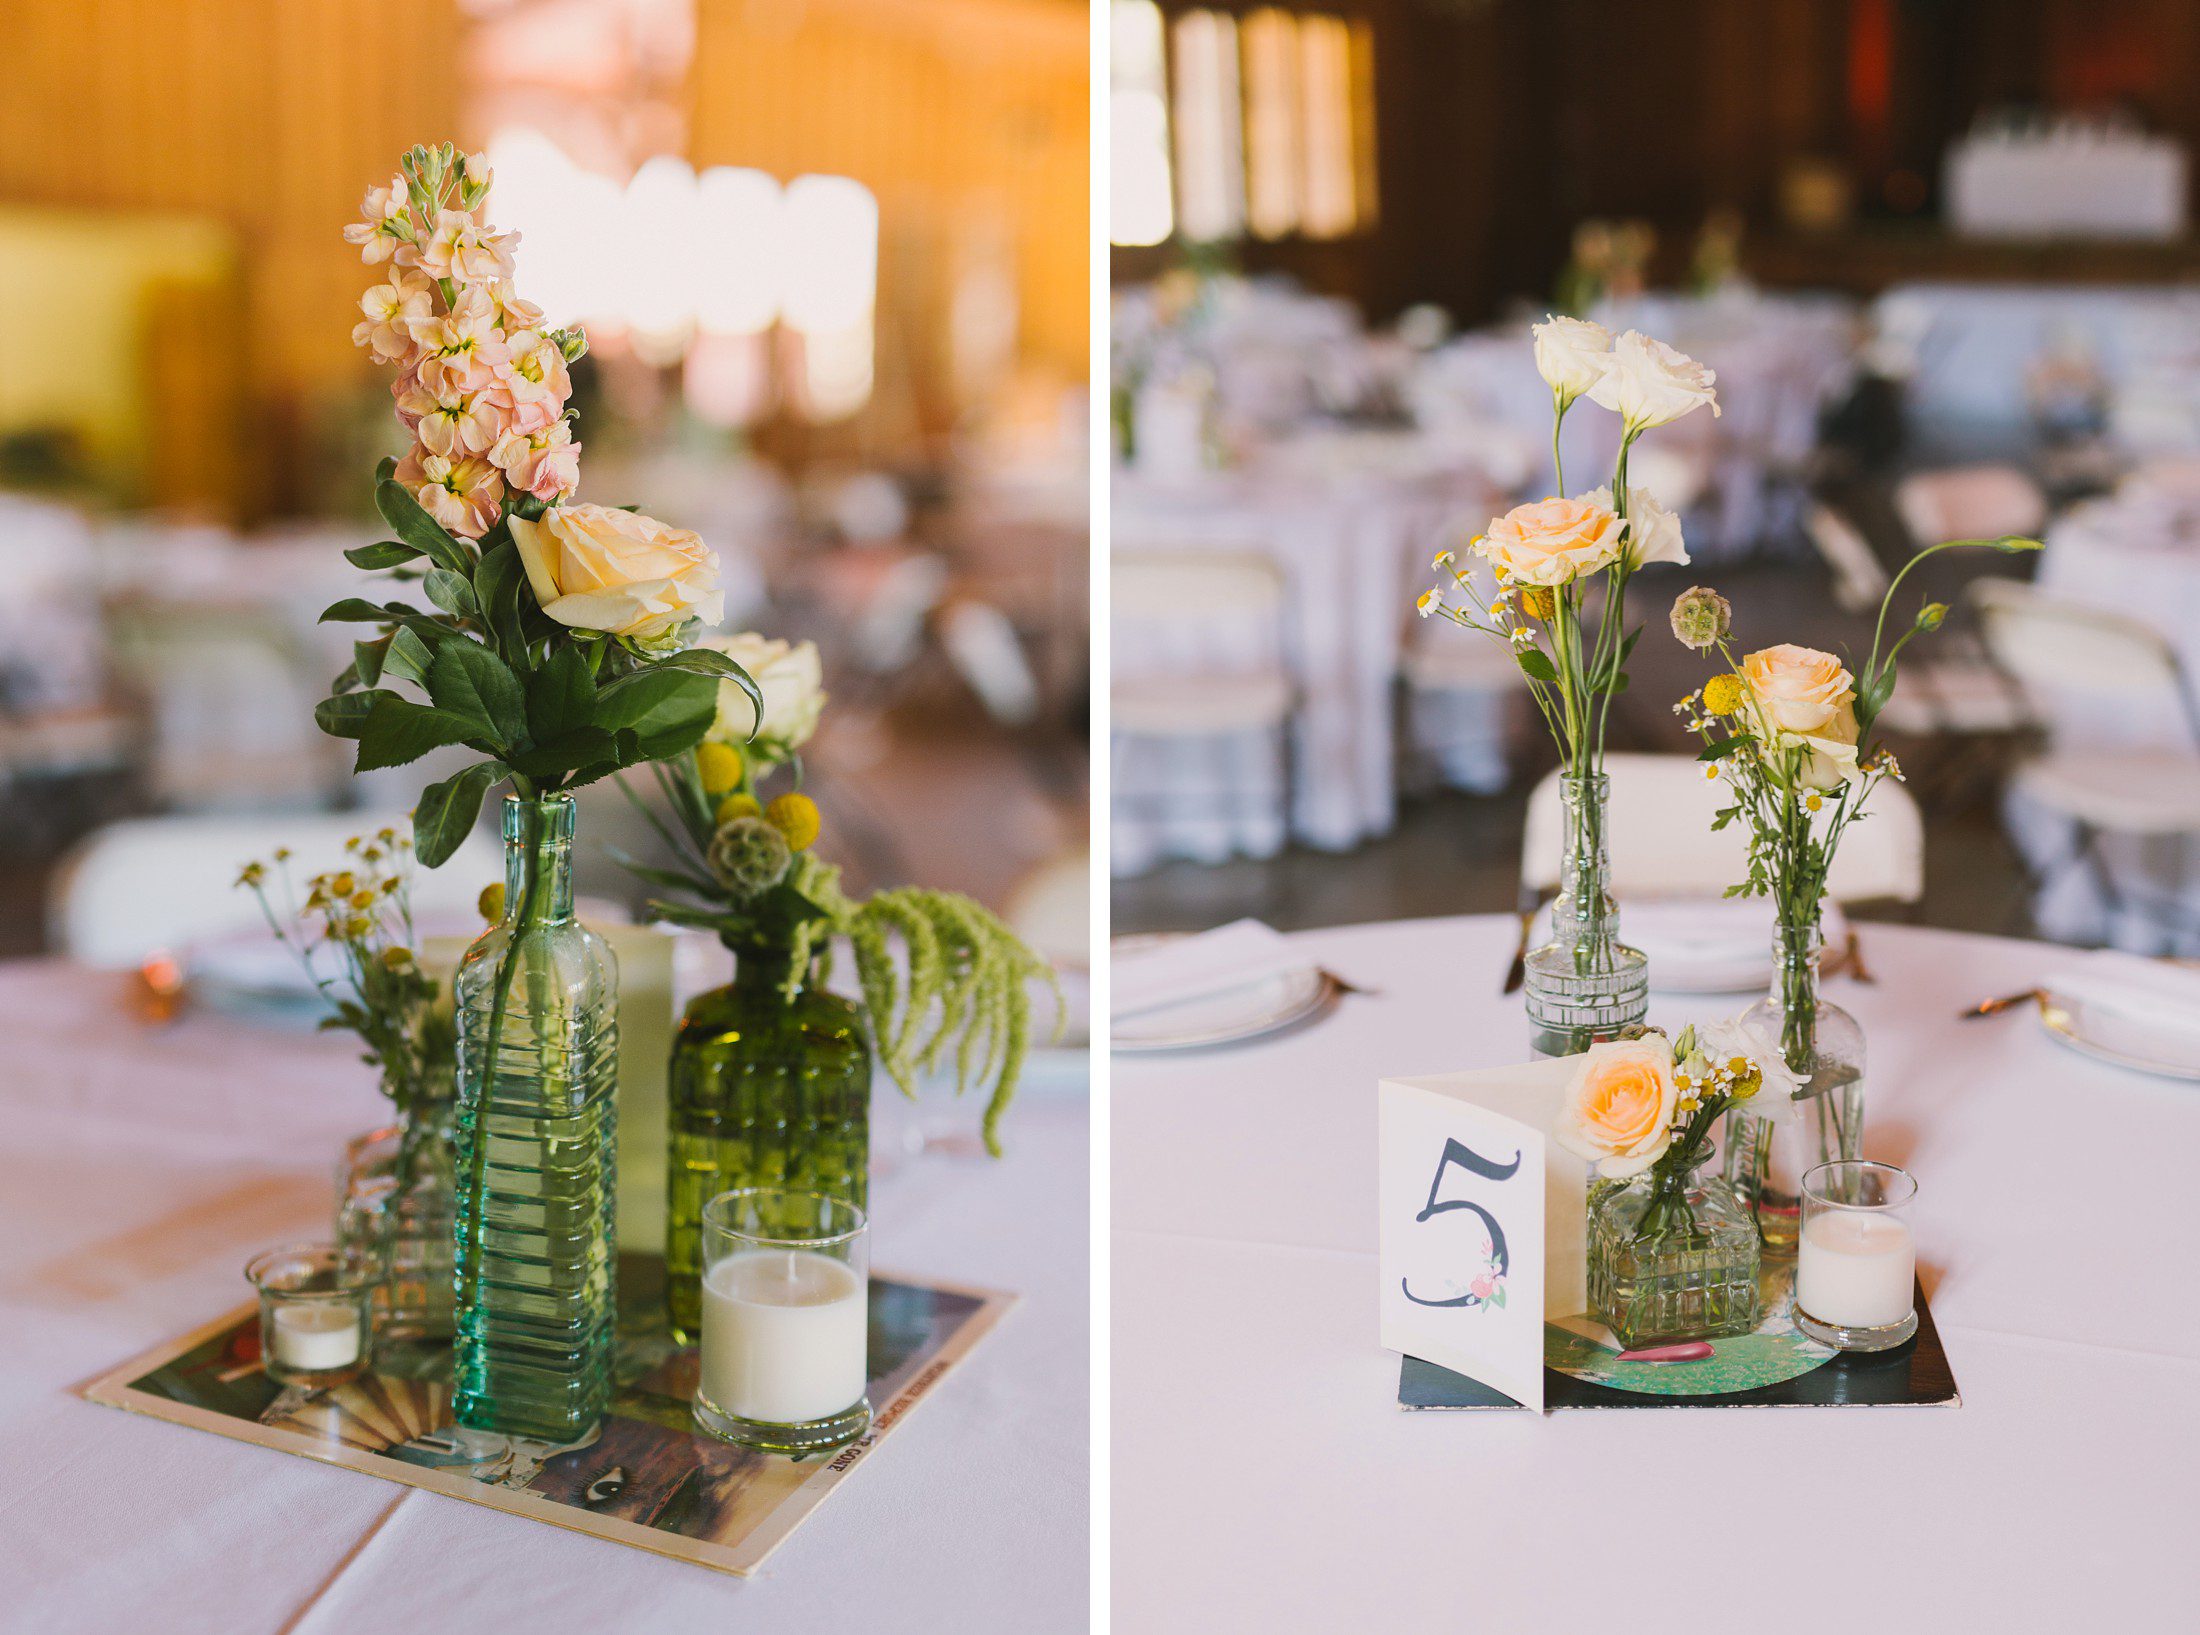 Vintage bottles with flowers for centerpieces